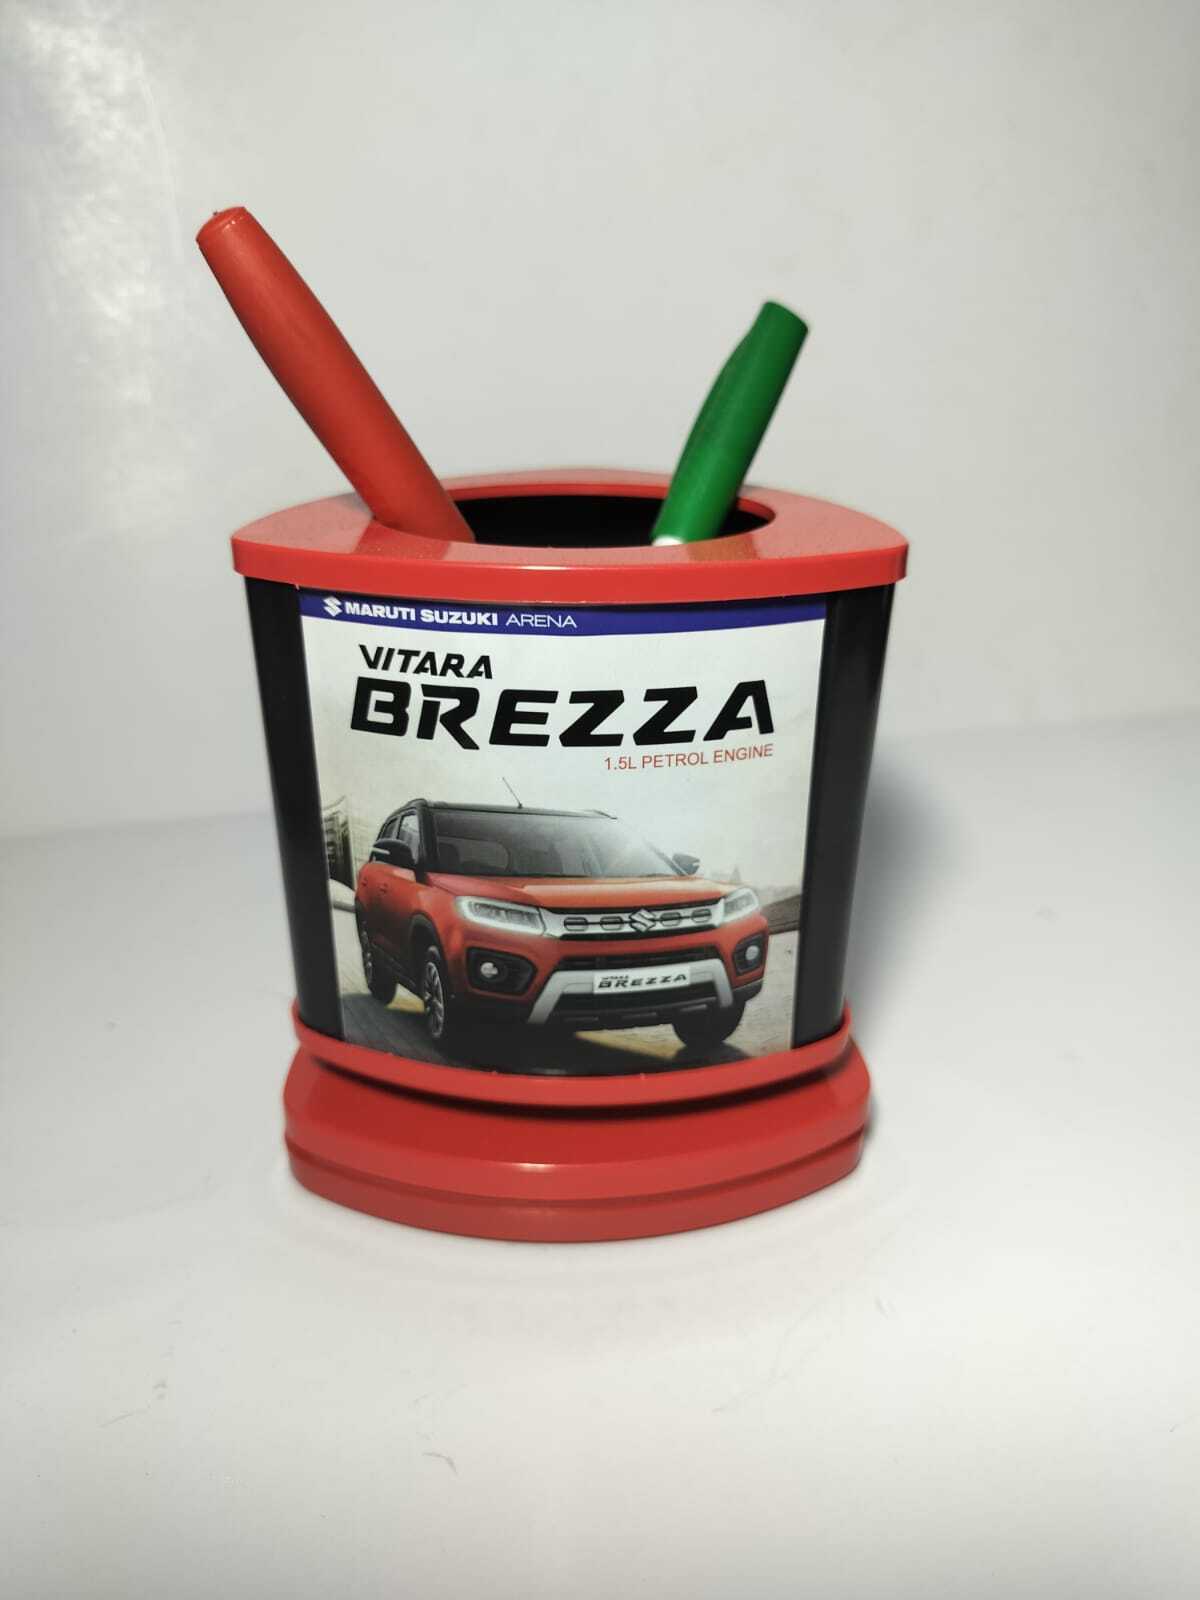 Promotional Pen Stand